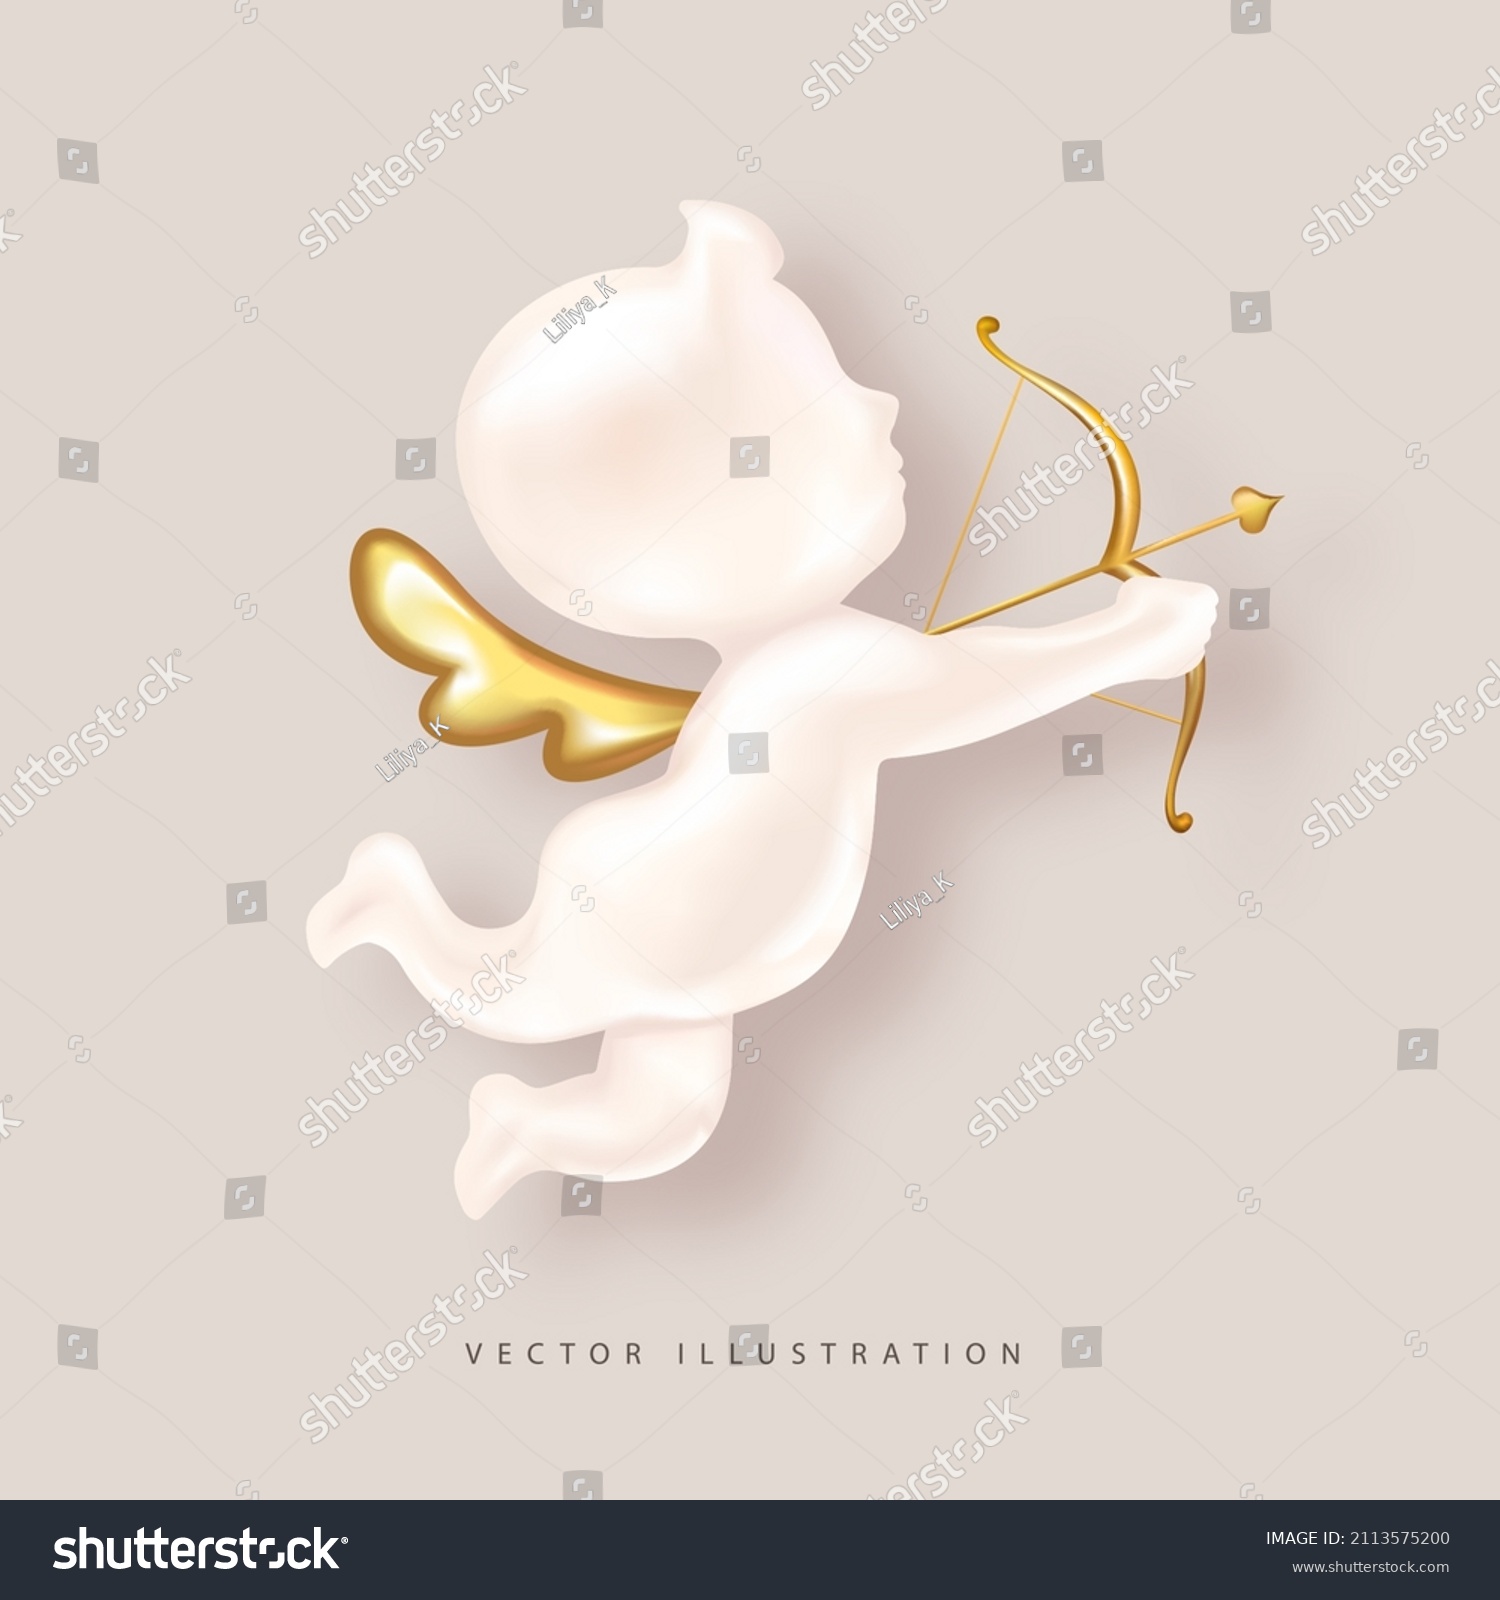 SVG of Realistic cupid with golden wings.3d object for romantic design. Decor for Valentine's Day, Wedding. Vector illustration svg